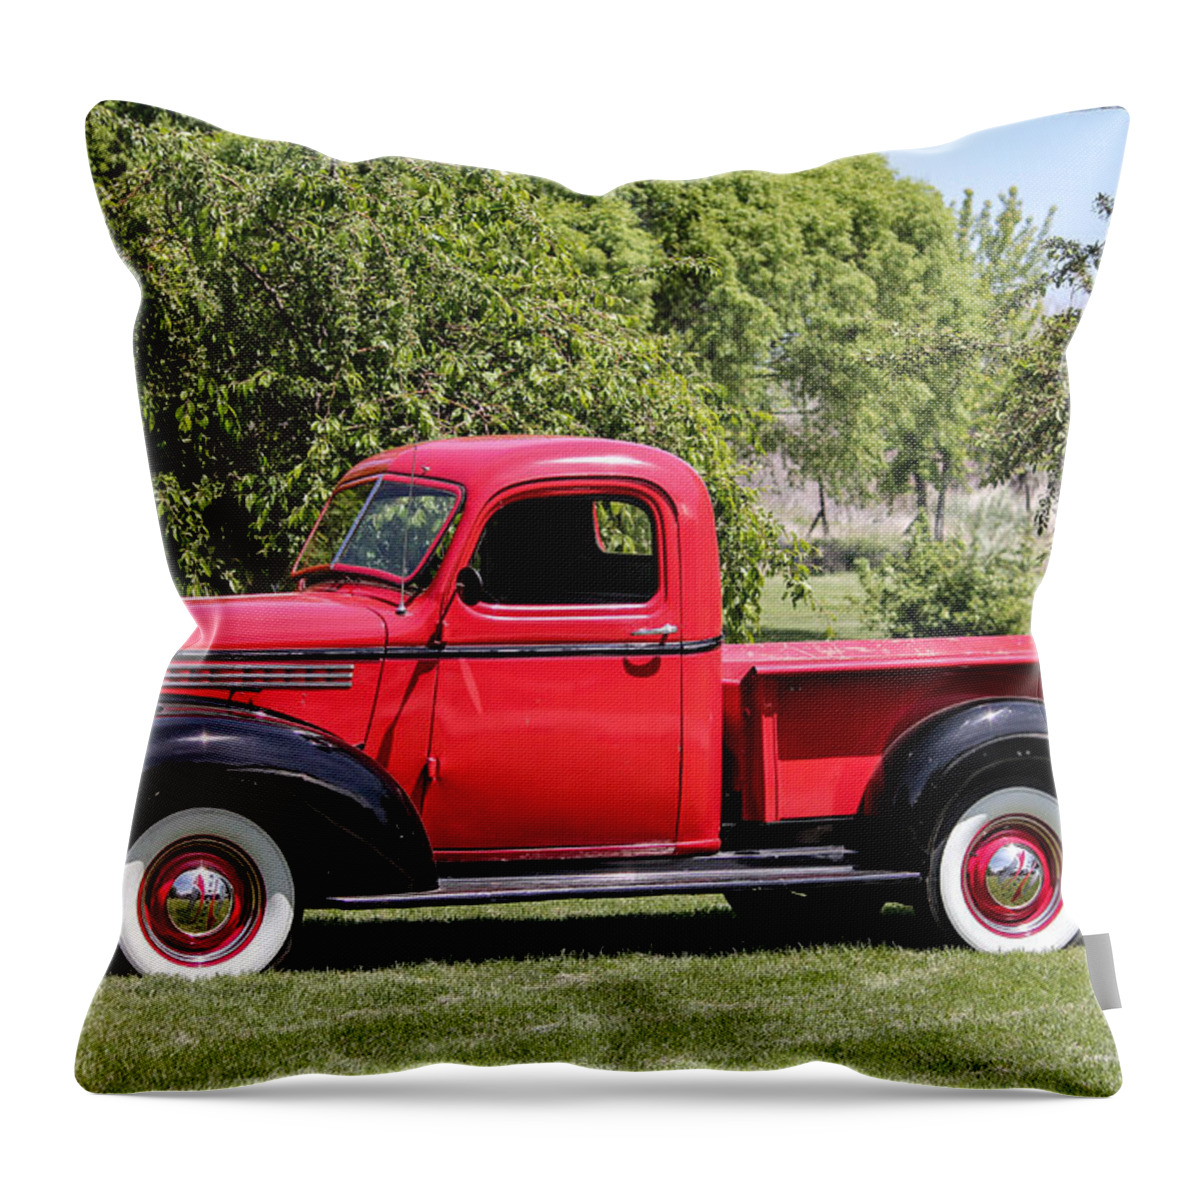 1946 Chevrolet Throw Pillow featuring the photograph 1946 Chevy Pickup by E Faithe Lester